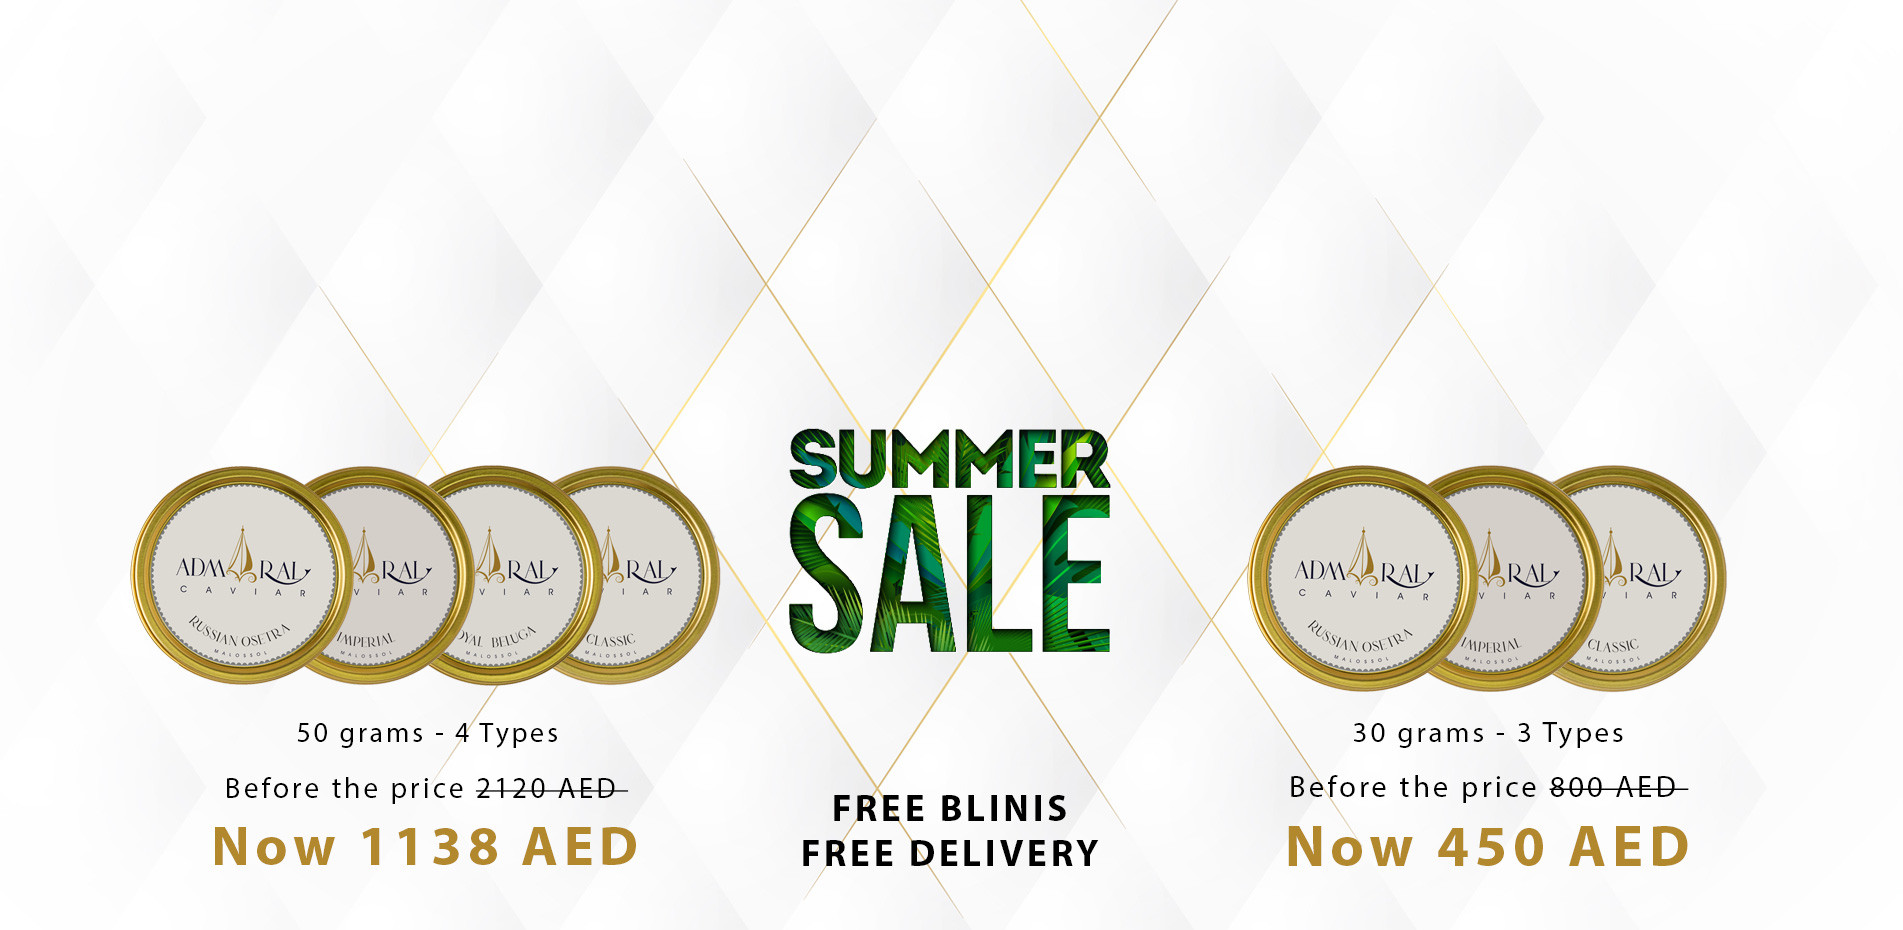 Sumer Sale - Free Blinis - Free Delivery